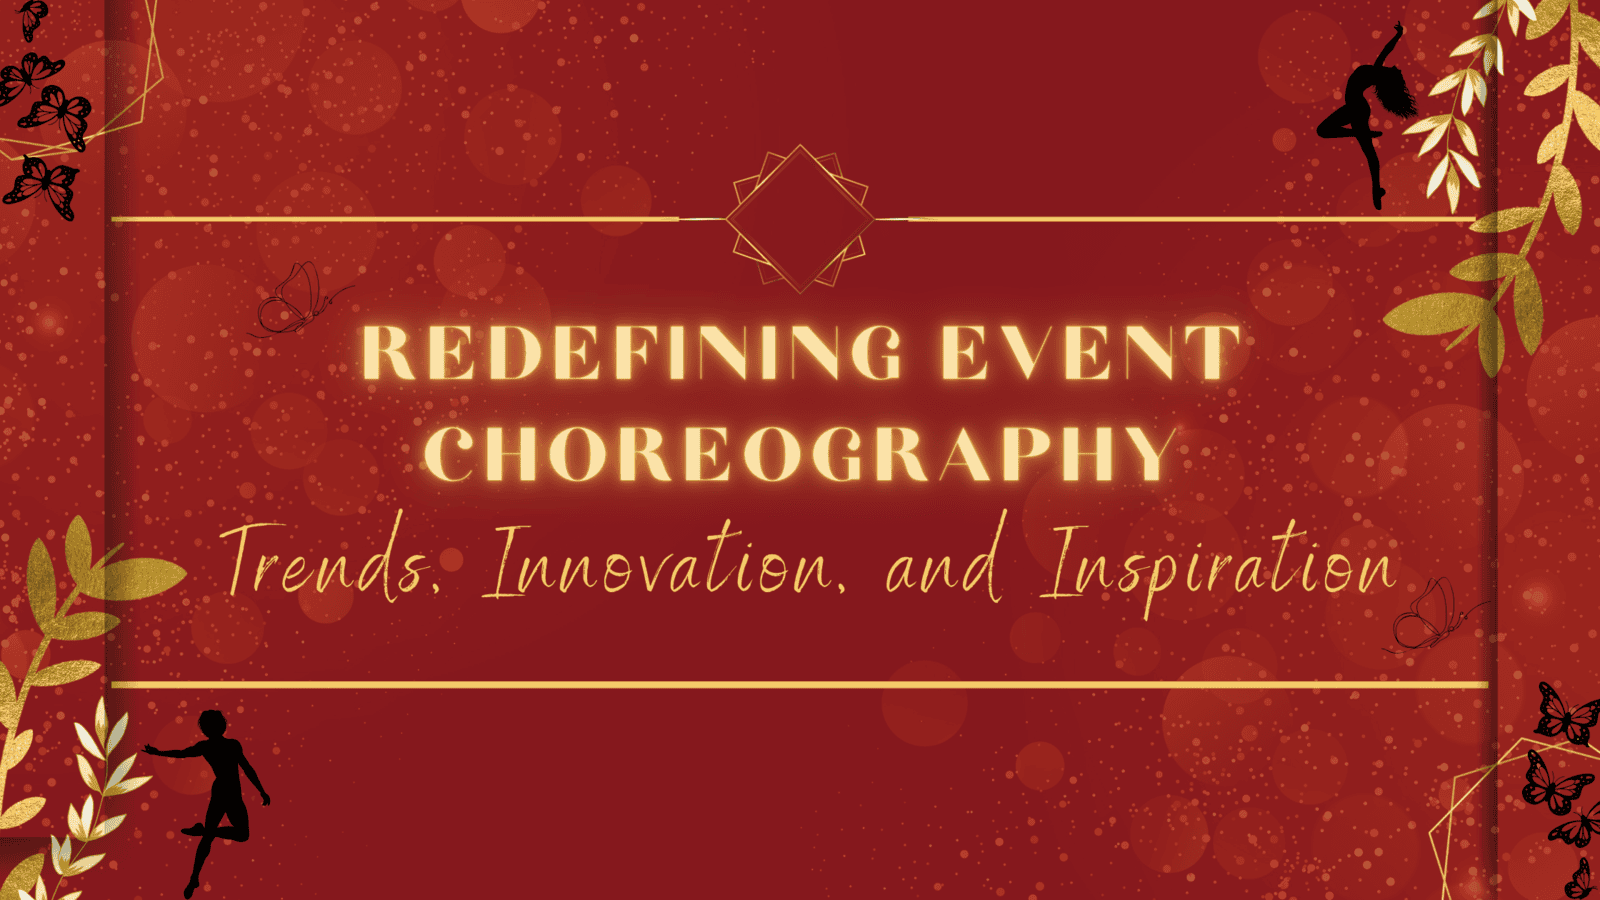 Redefining Event Choreography: Trends, Innovation, and Inspiration